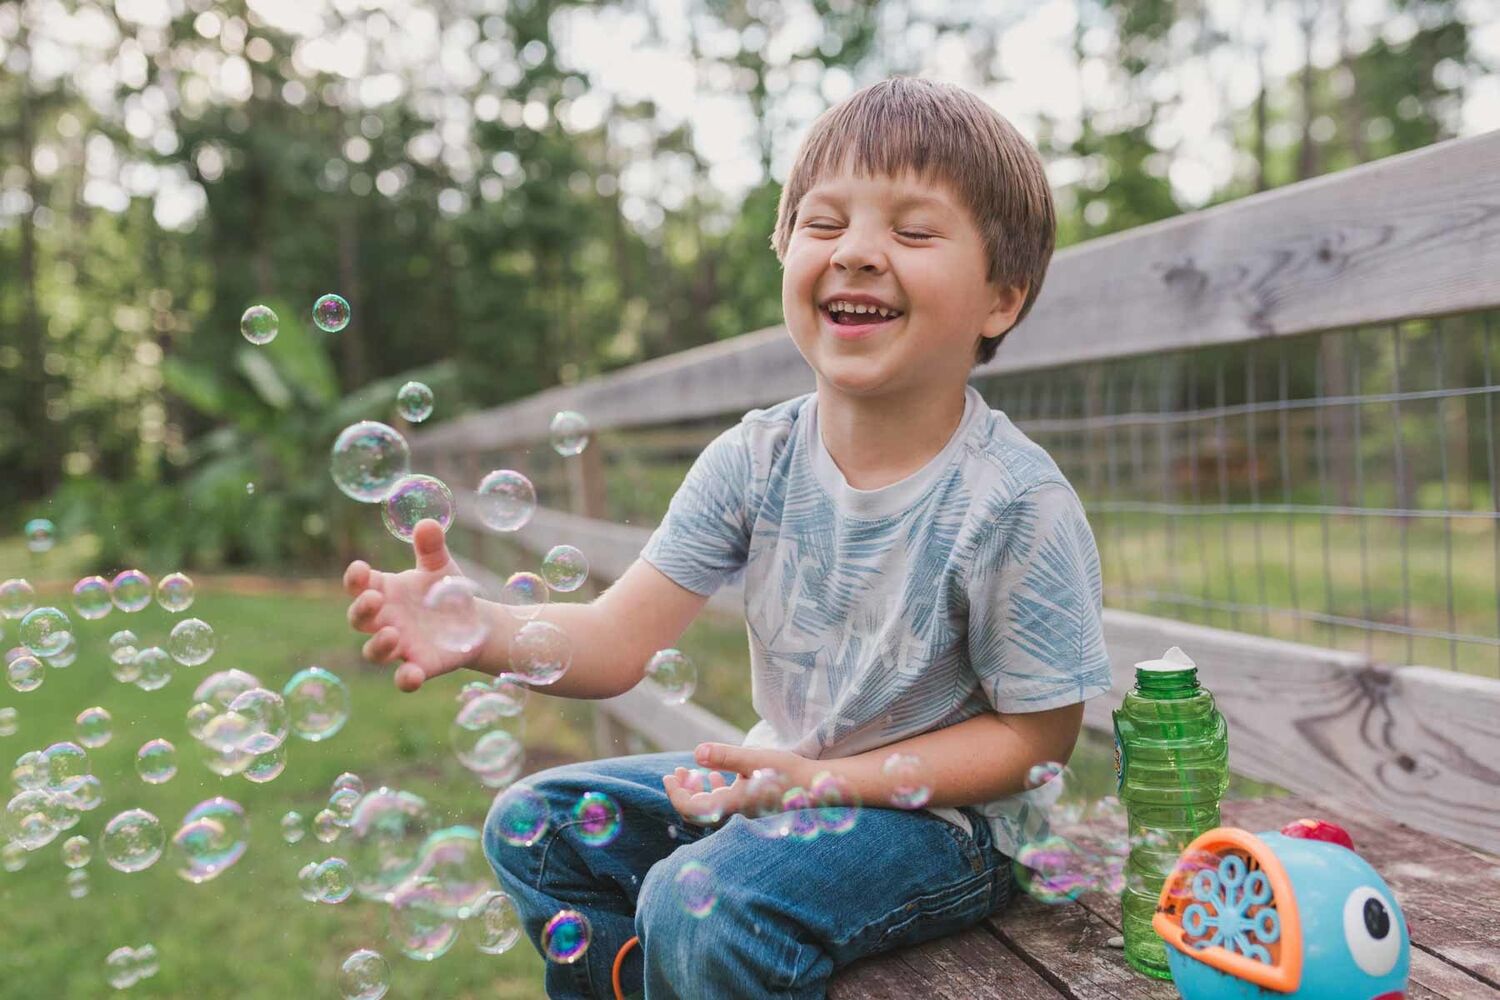 Boy Wearing Jeans And Tshirt Sitting On Bench Outside Playing With Bubbles